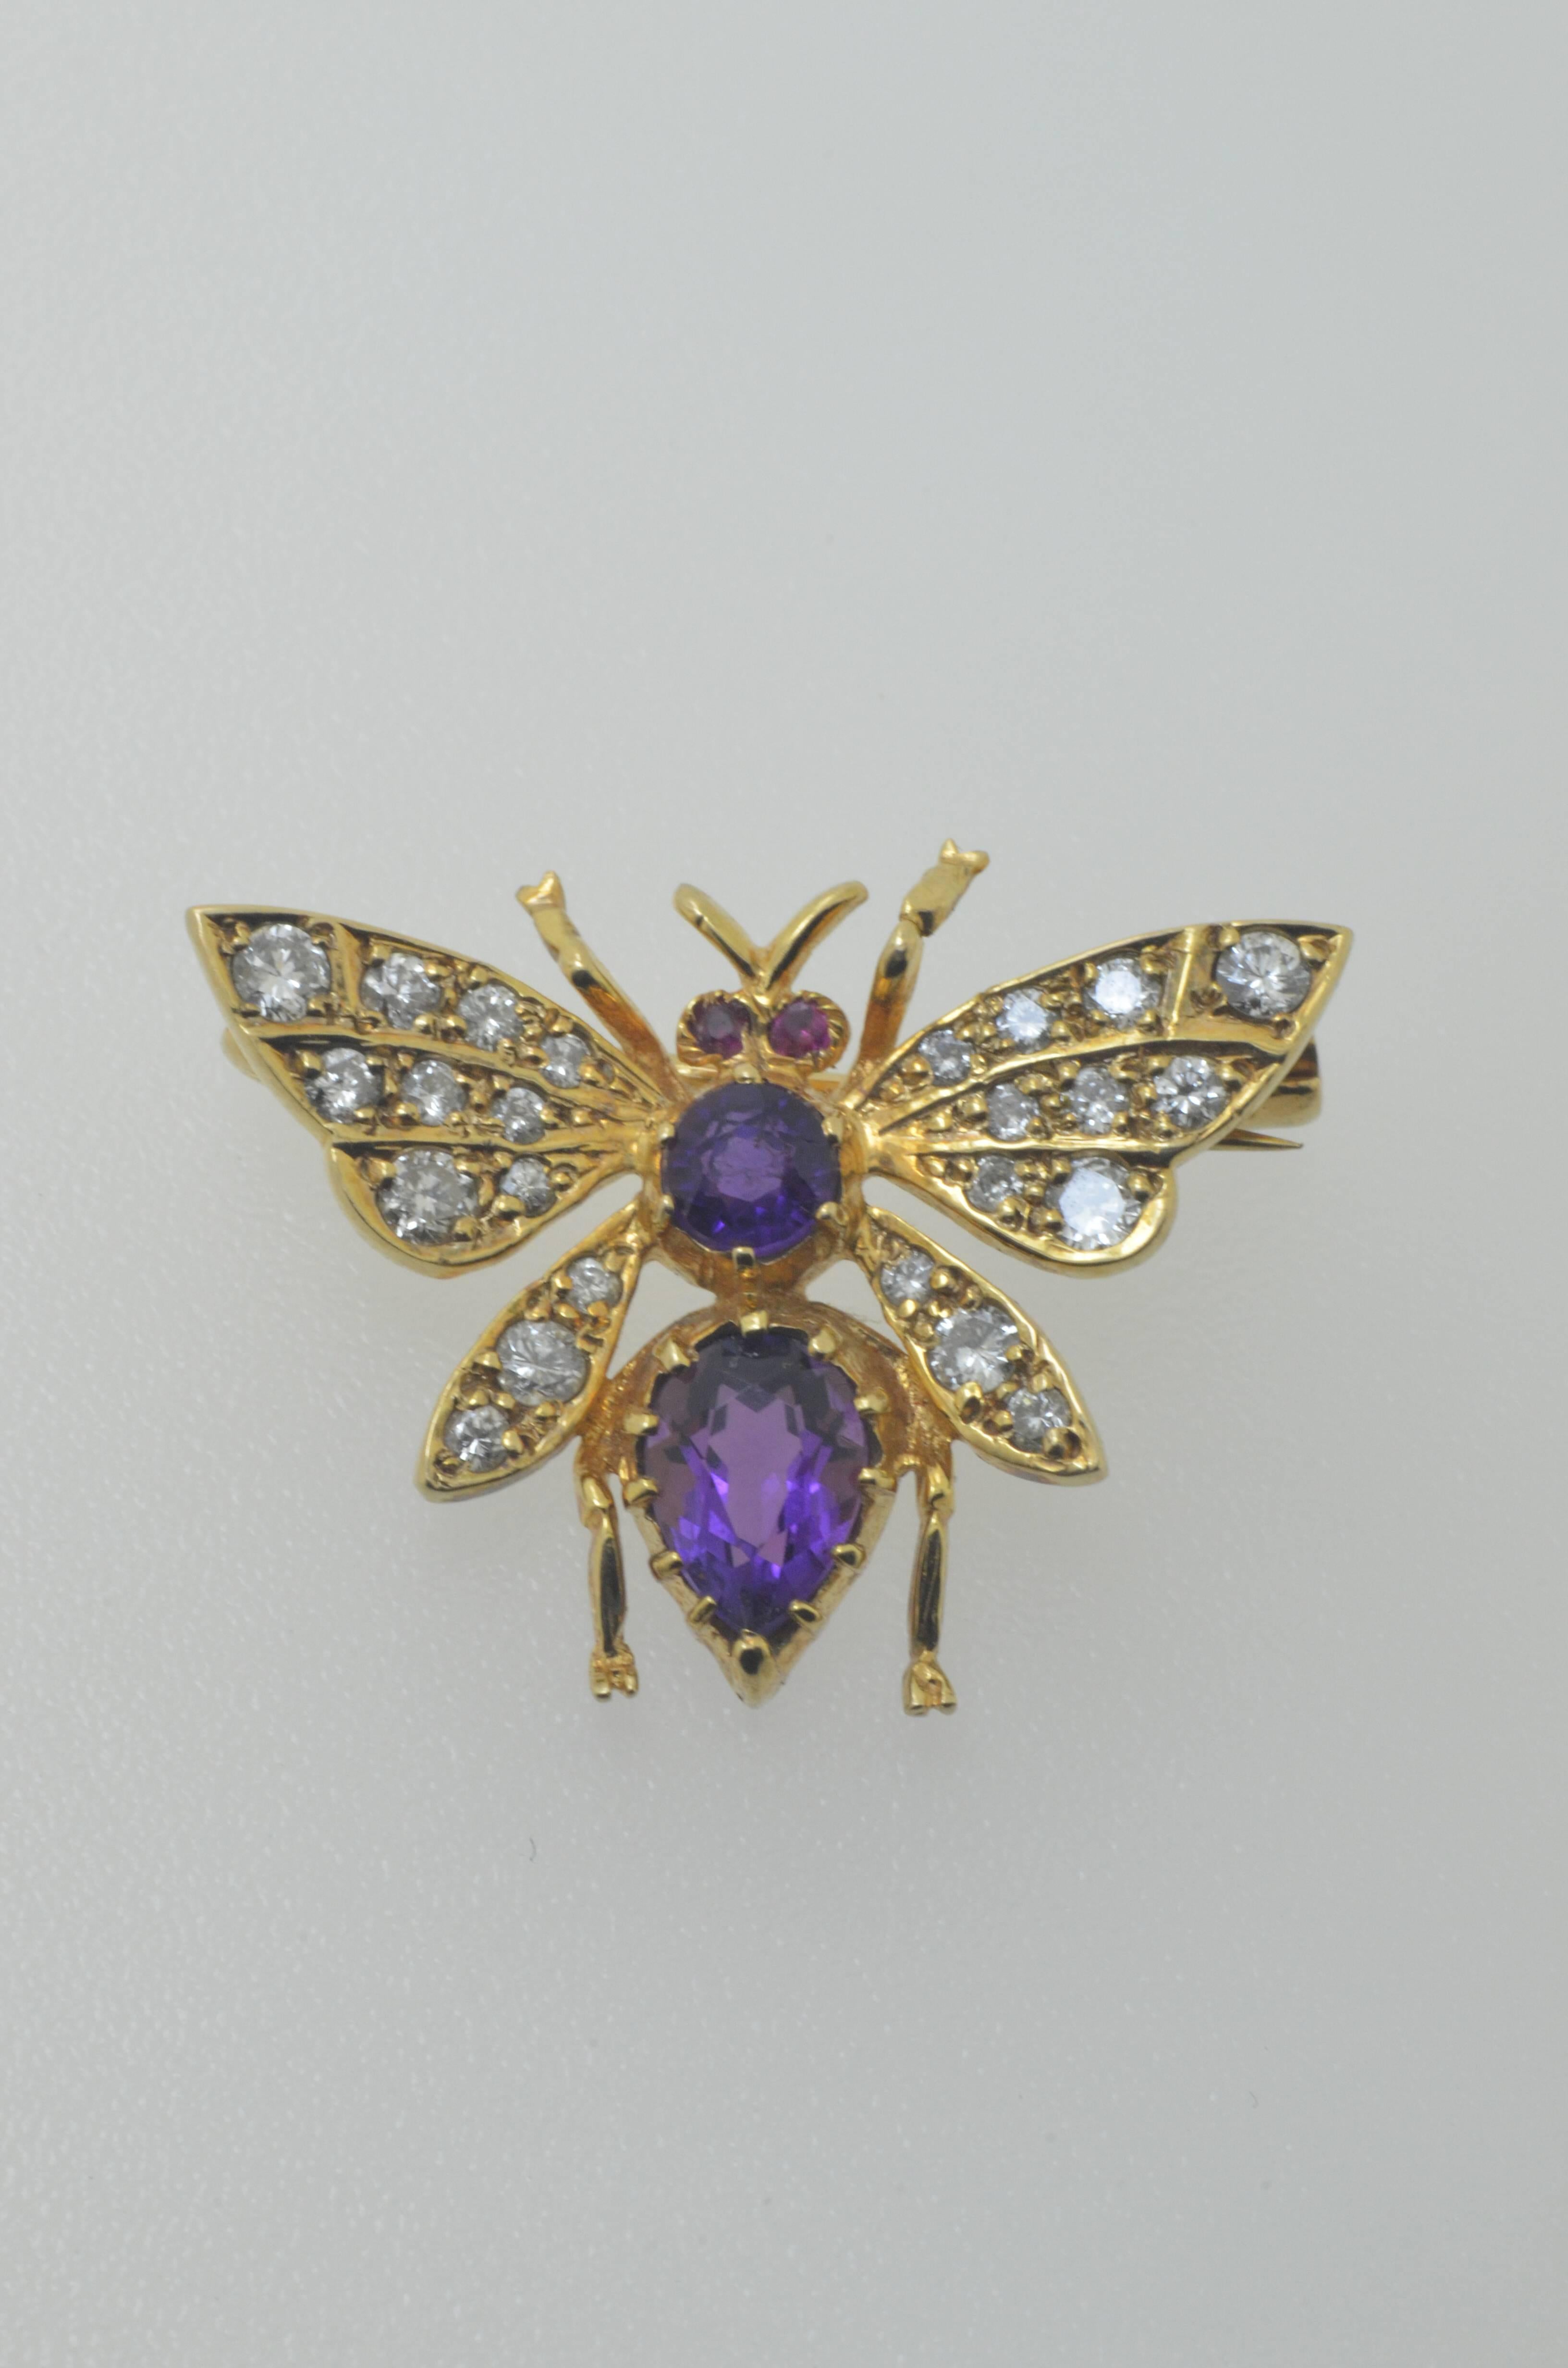 Yellow Gold Diamond Ruby & Amethyst Insect Brooch In Good Condition For Sale In Fuengirola, Malaga